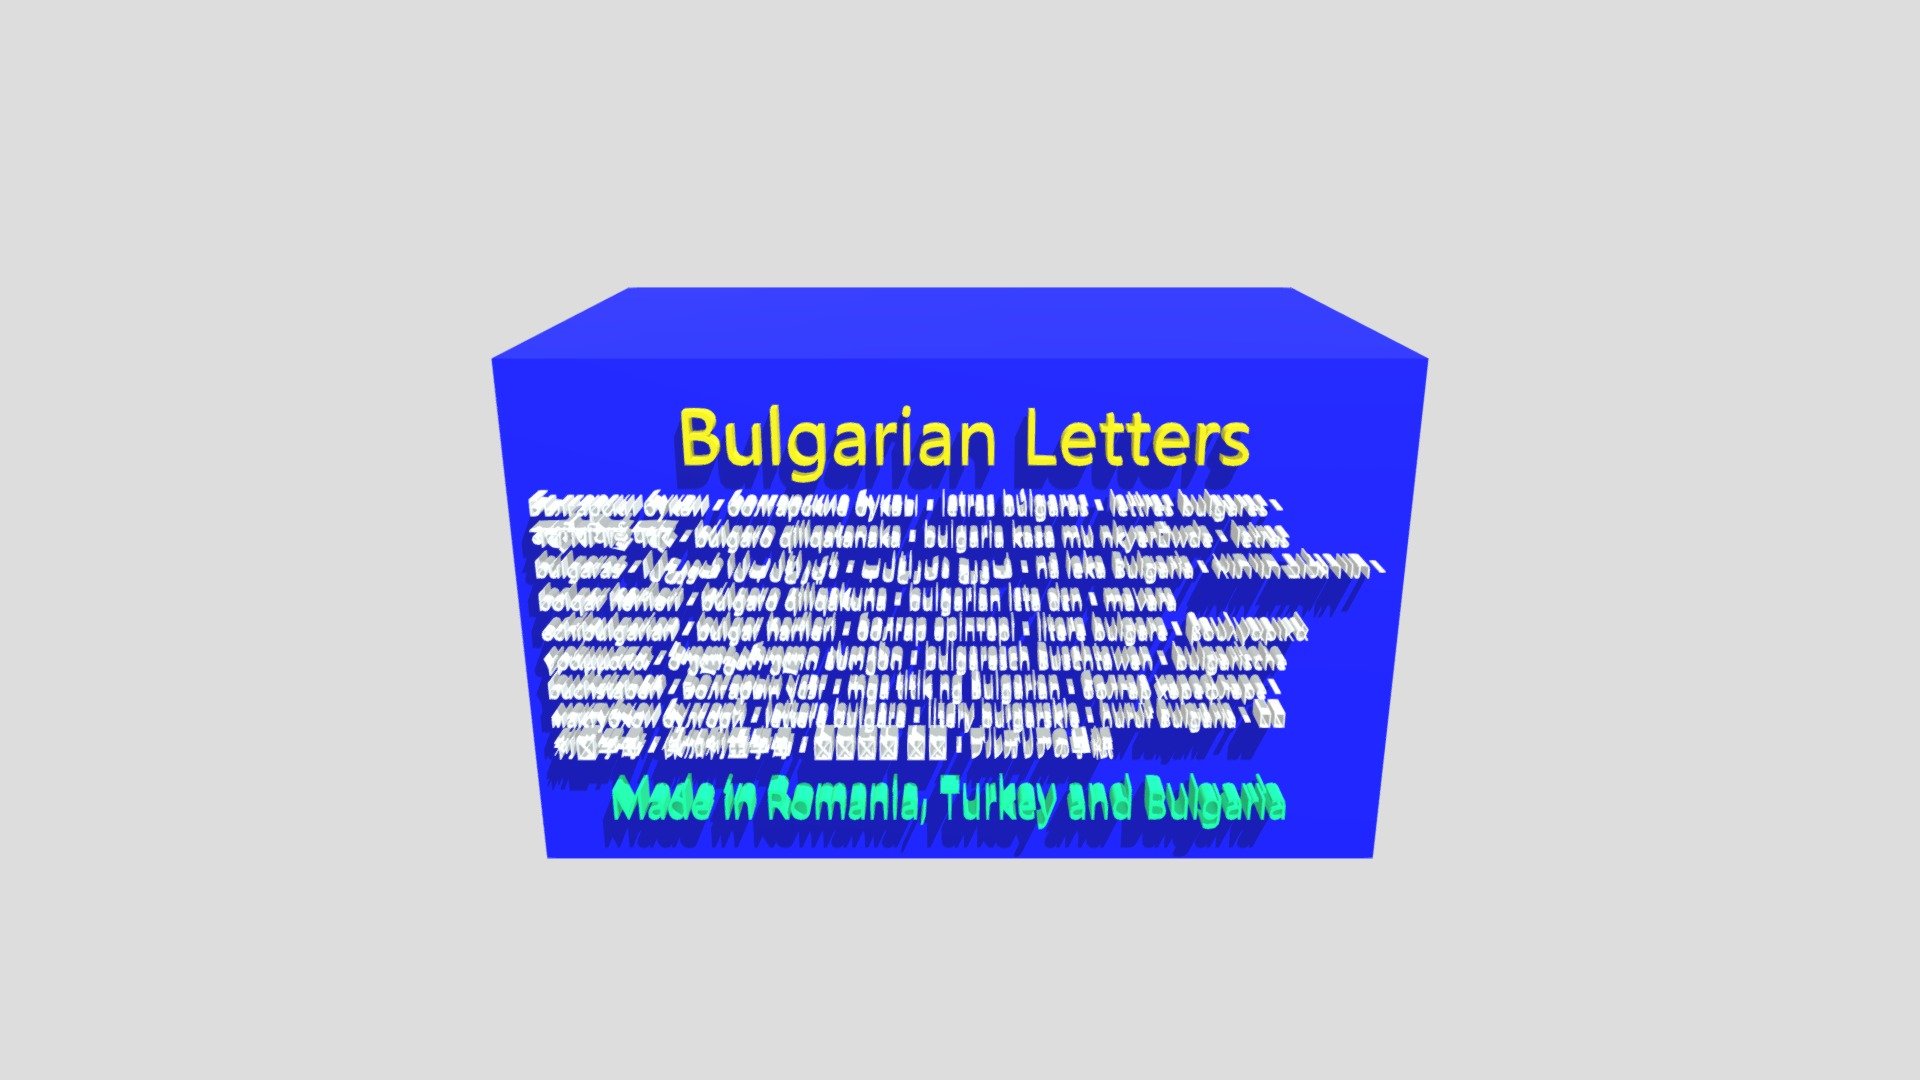 The Bulgarian Cyrillic alphabet (Bulgarian: Българска кирилица) is used to write the Bulgarian language. The Cyrillic alphabet was originally developed in the First Bulgarian Empire during the 9th – 10th century AD at the Preslav Literary School 3d model